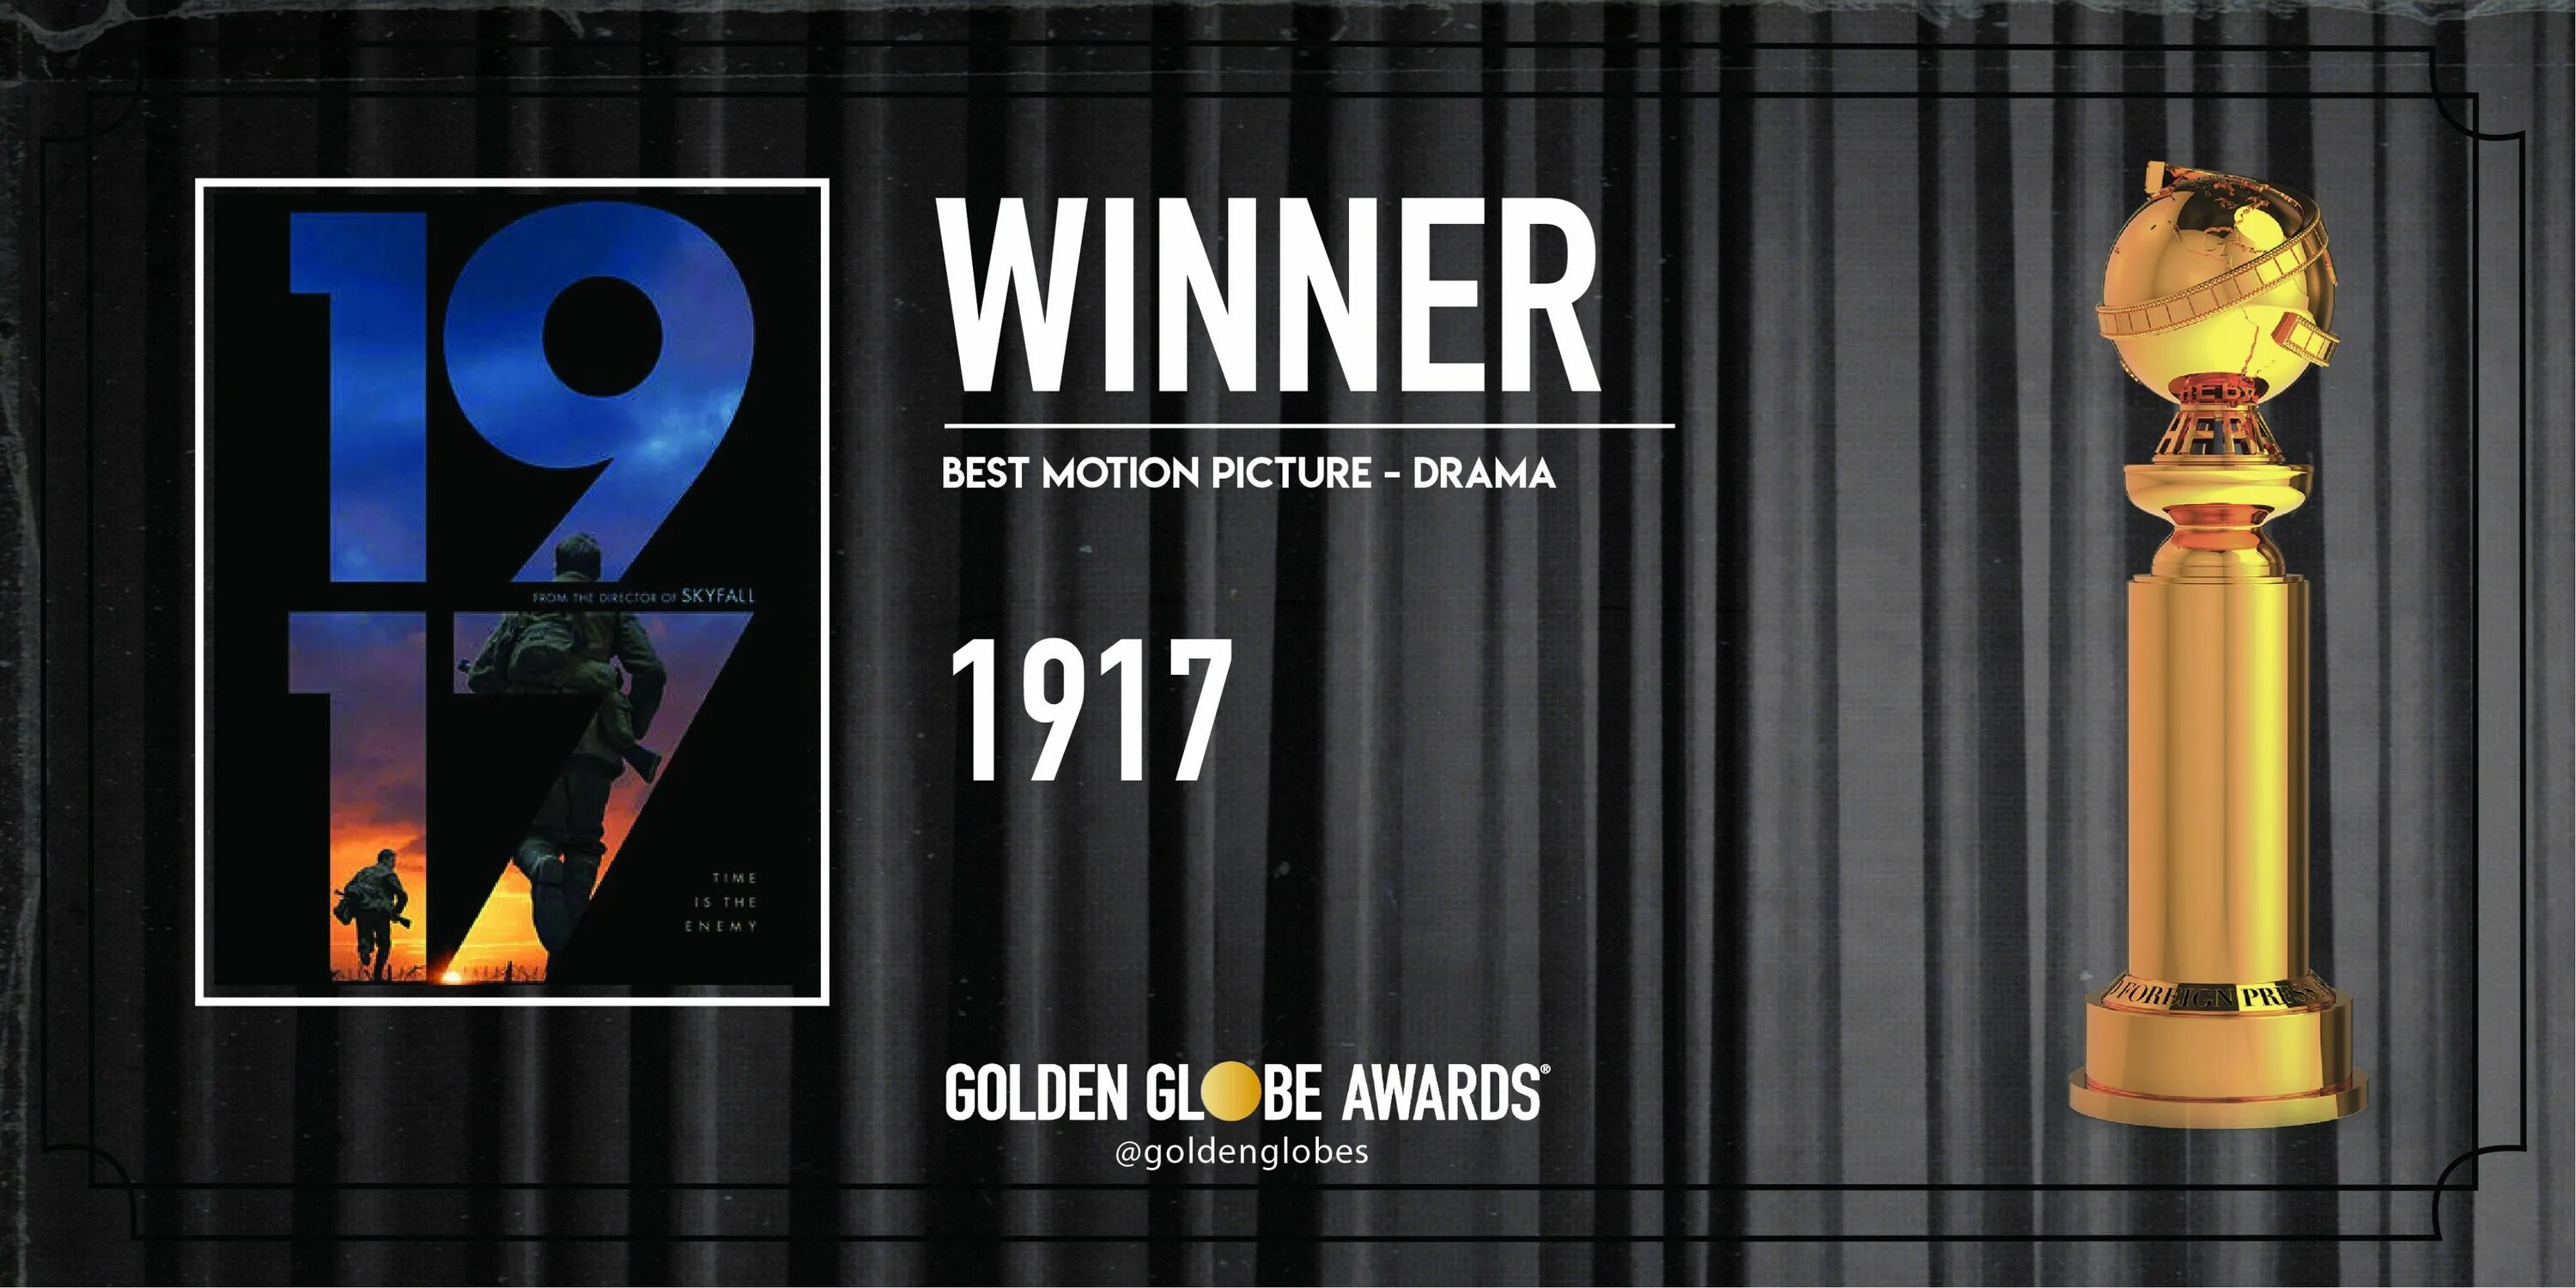 Золотой глобус драма. Look on the Internet and find the names of the latest winners of a Golden Globe for best Motion picture.